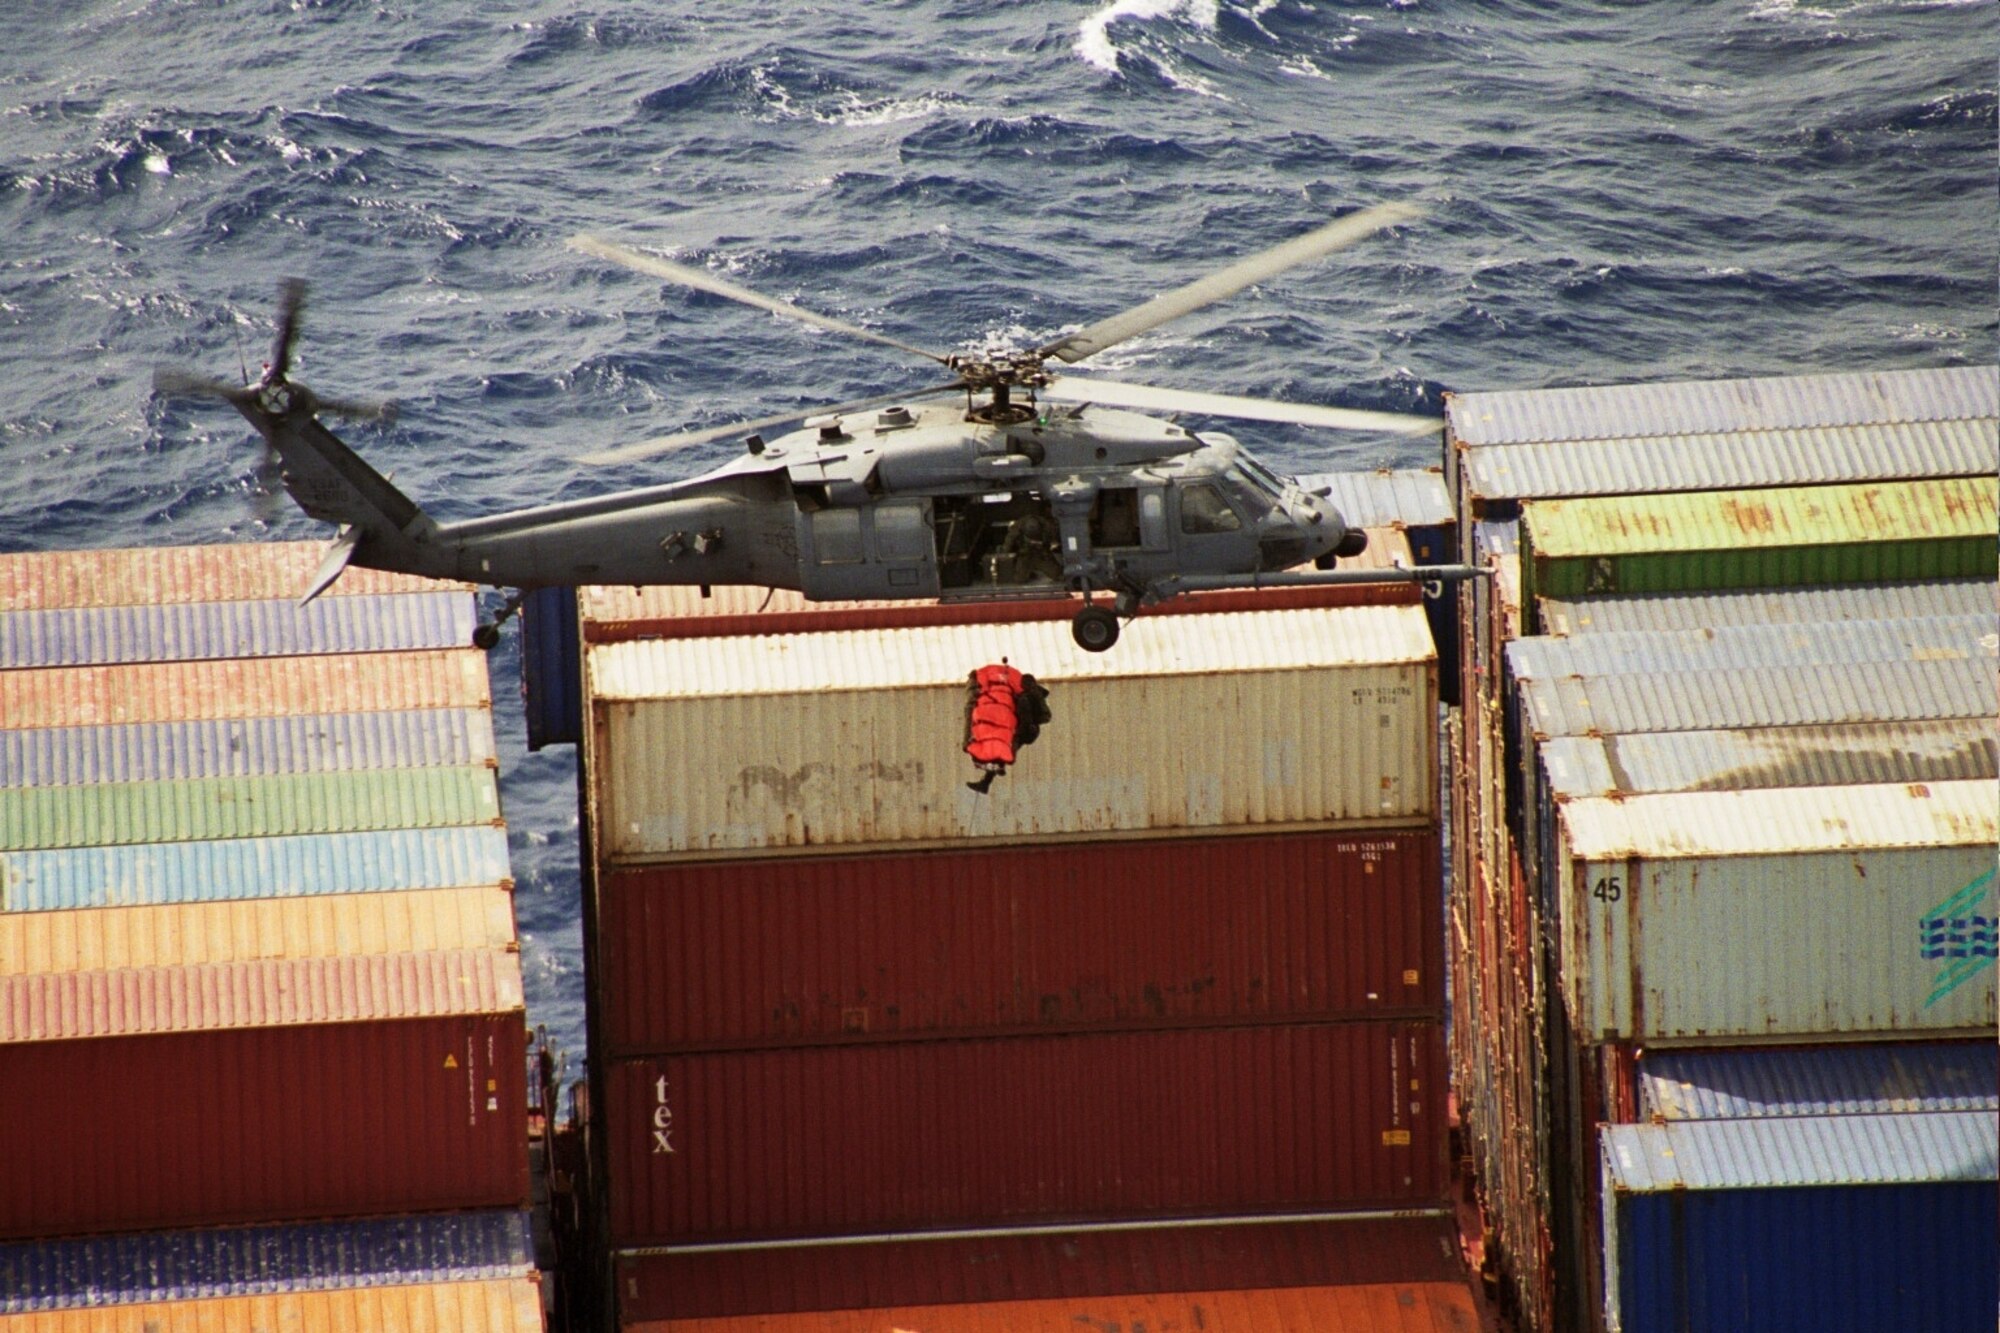 A pararescueman from the 131st Rescue Squadron hoists the patient from the APC Peru cargo container ship in to the hovering HH-60G Pave Hawk June 18, 2008. The 129th was credited with its 559th save. (Air Force photo by Tech. Sgt. Brock Woodward)